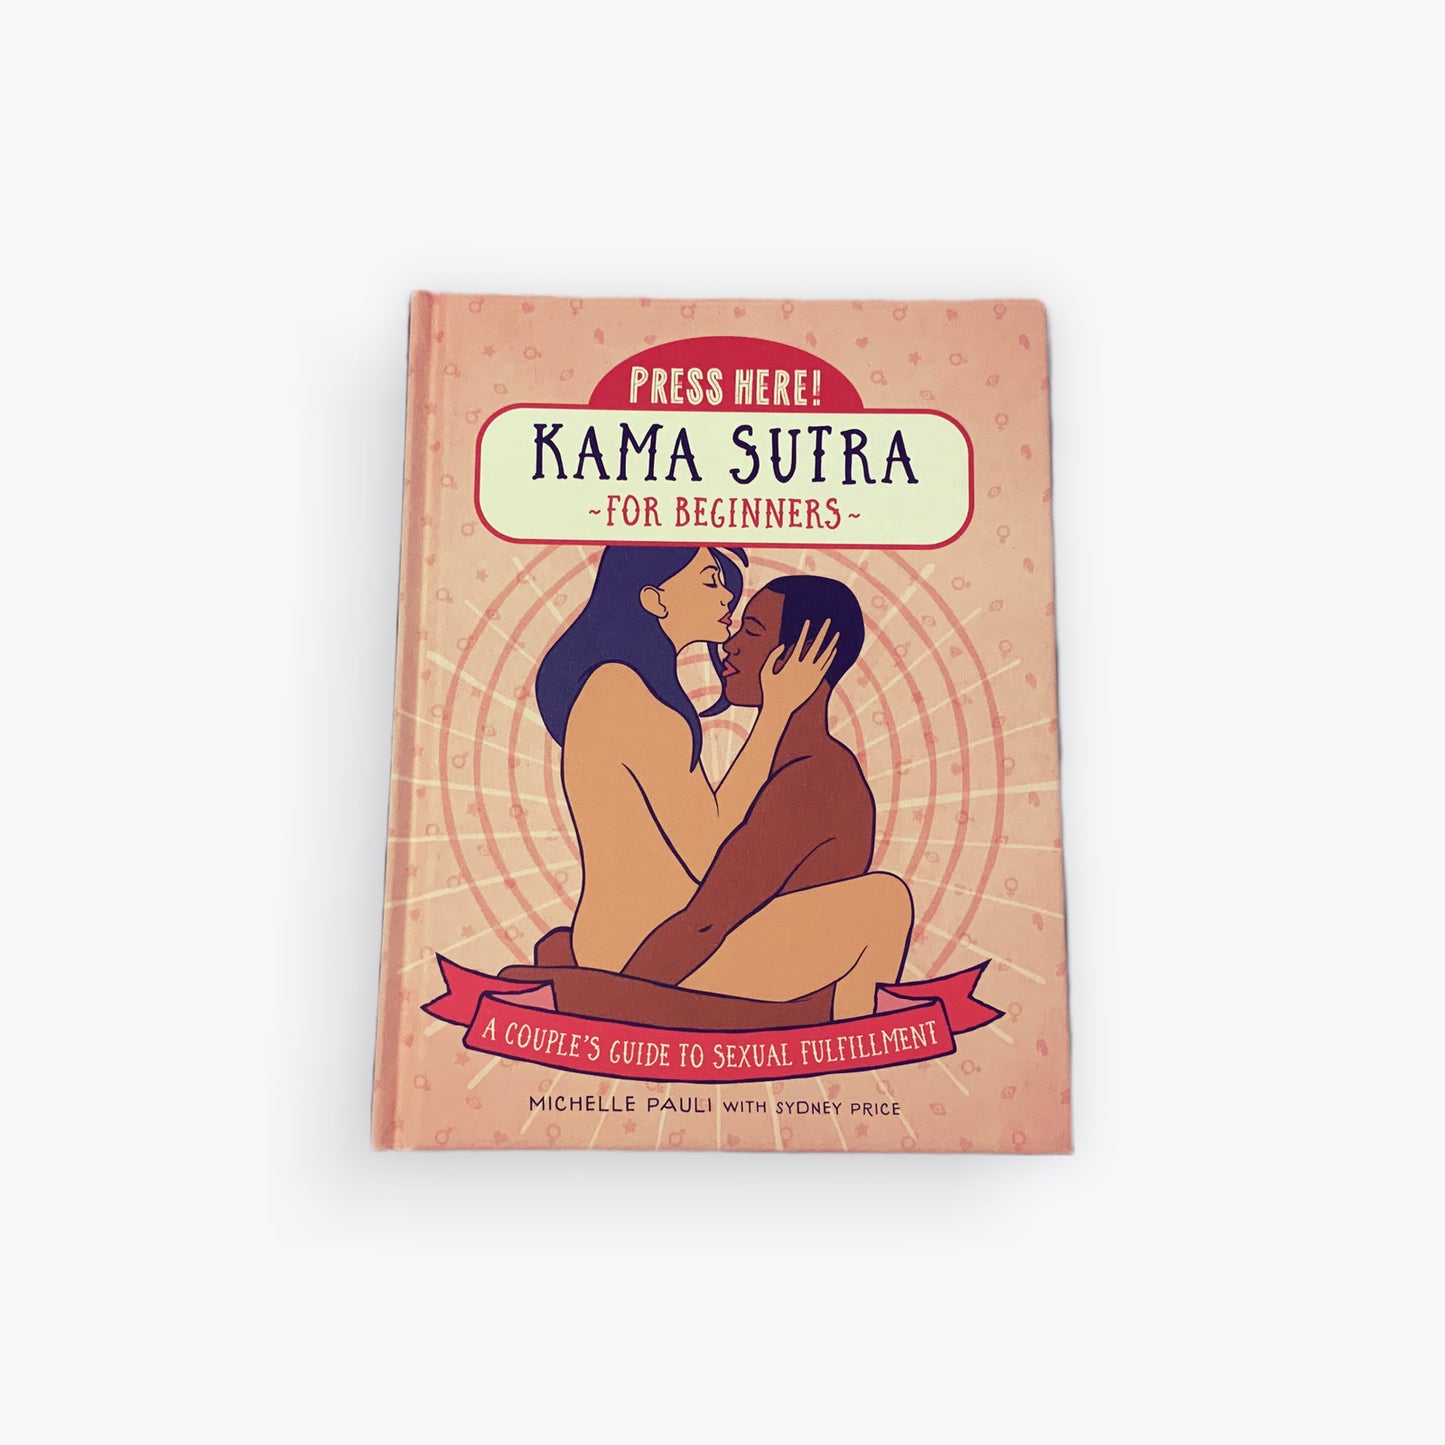 Karma Sutra for beginners-press here